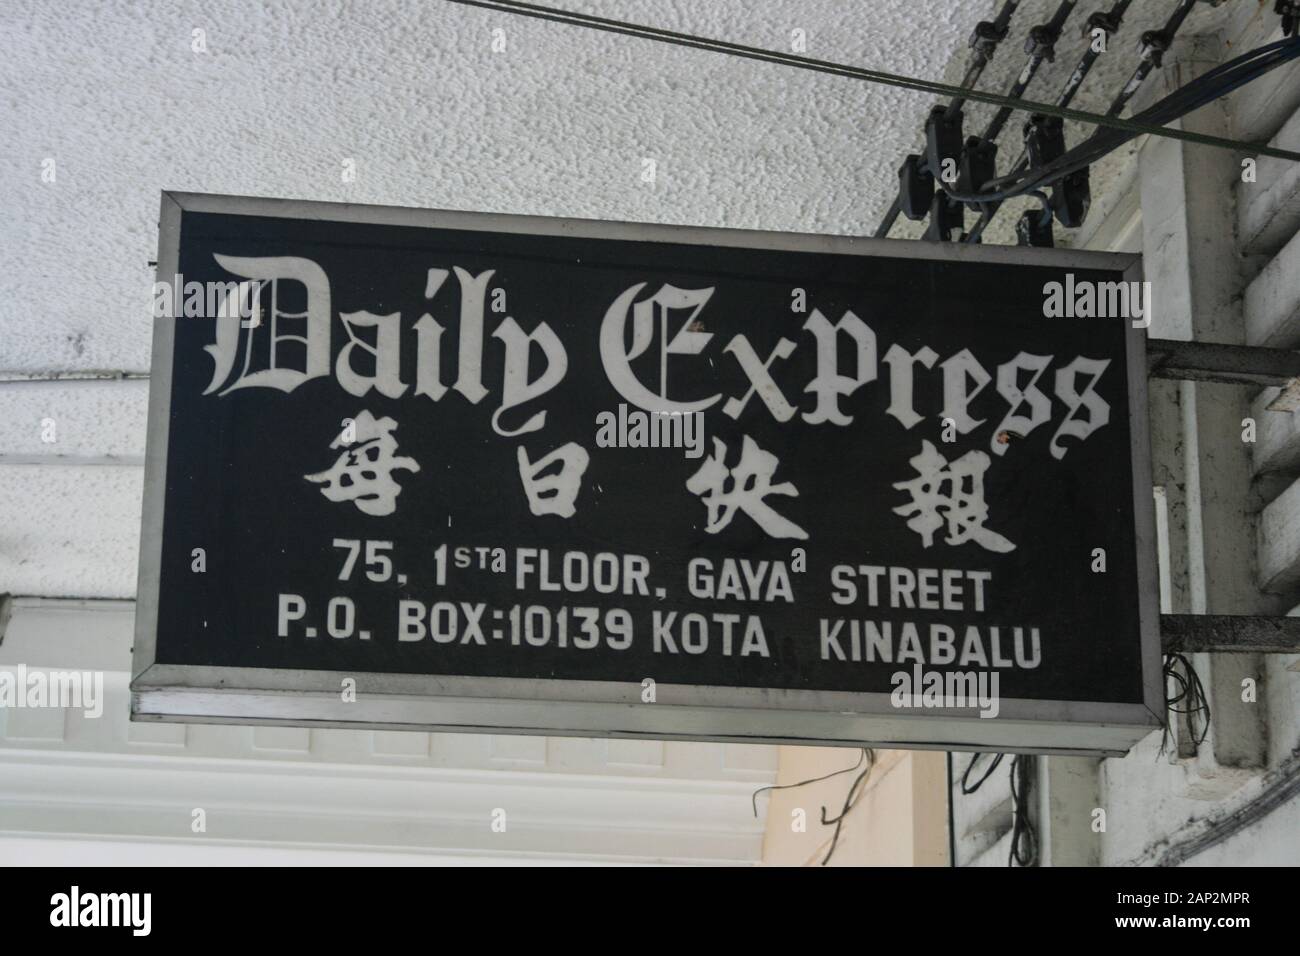 Sign for the Daily Express newspaper in Kota Kinabalu, Borneo Malaysia Stock Photo